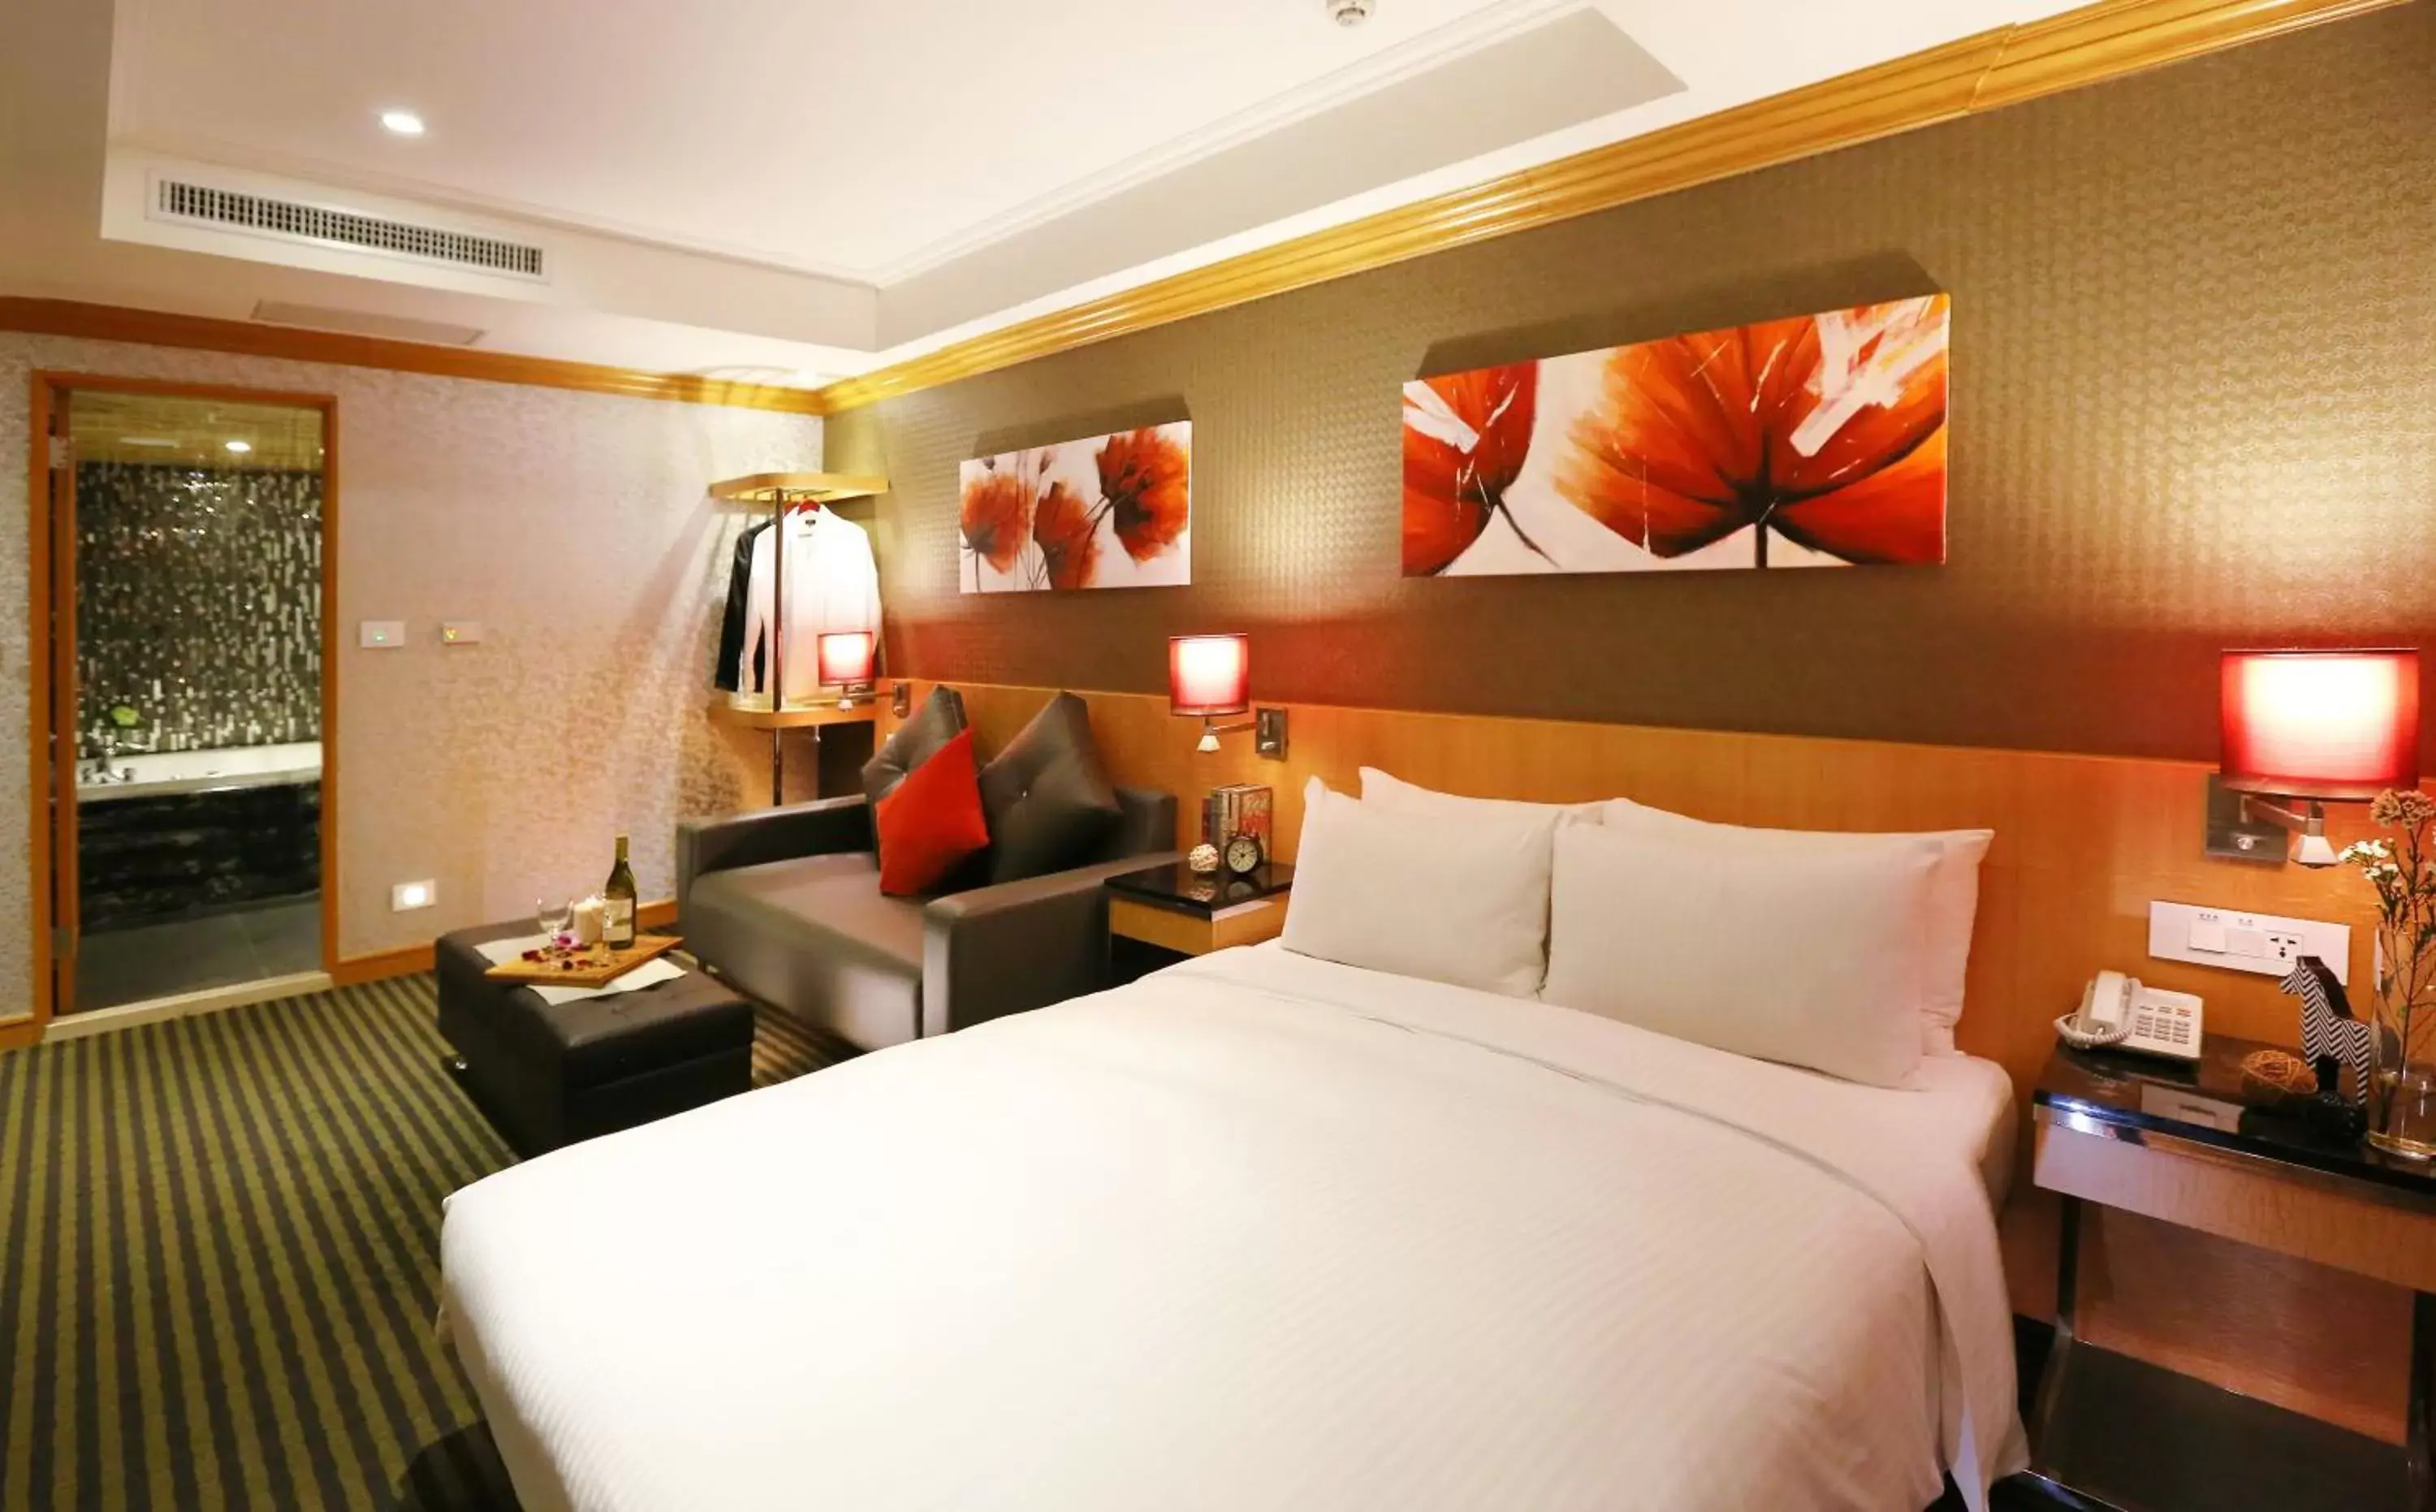 Bedroom in Beauty Hotels Taipei - Hotel Bchic